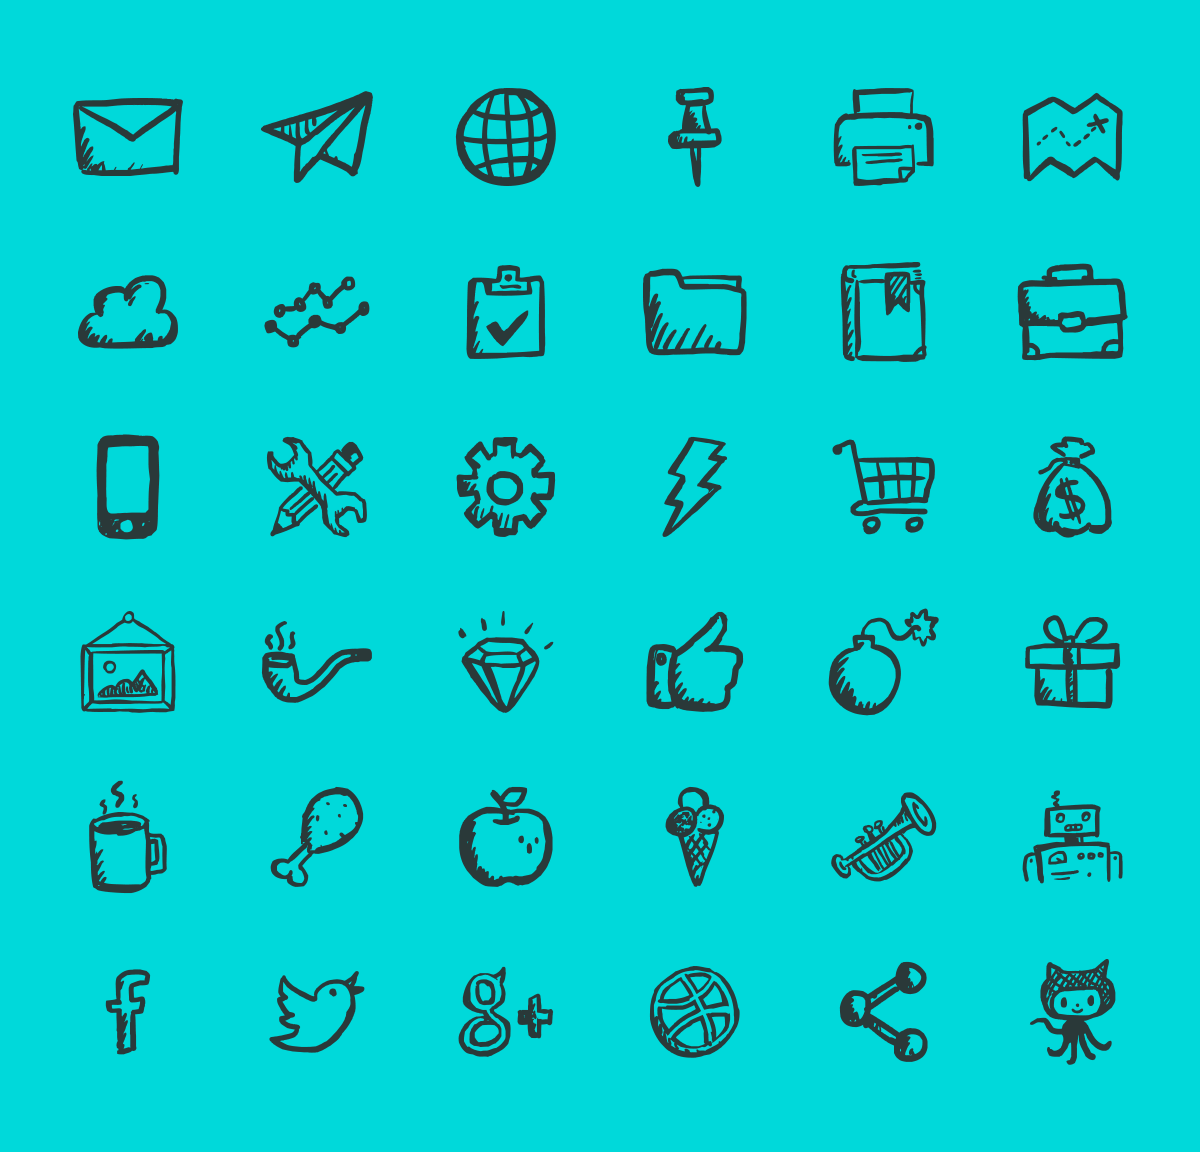 Foundation 150 free icons (SVG, EPS, PSD, PNG files)